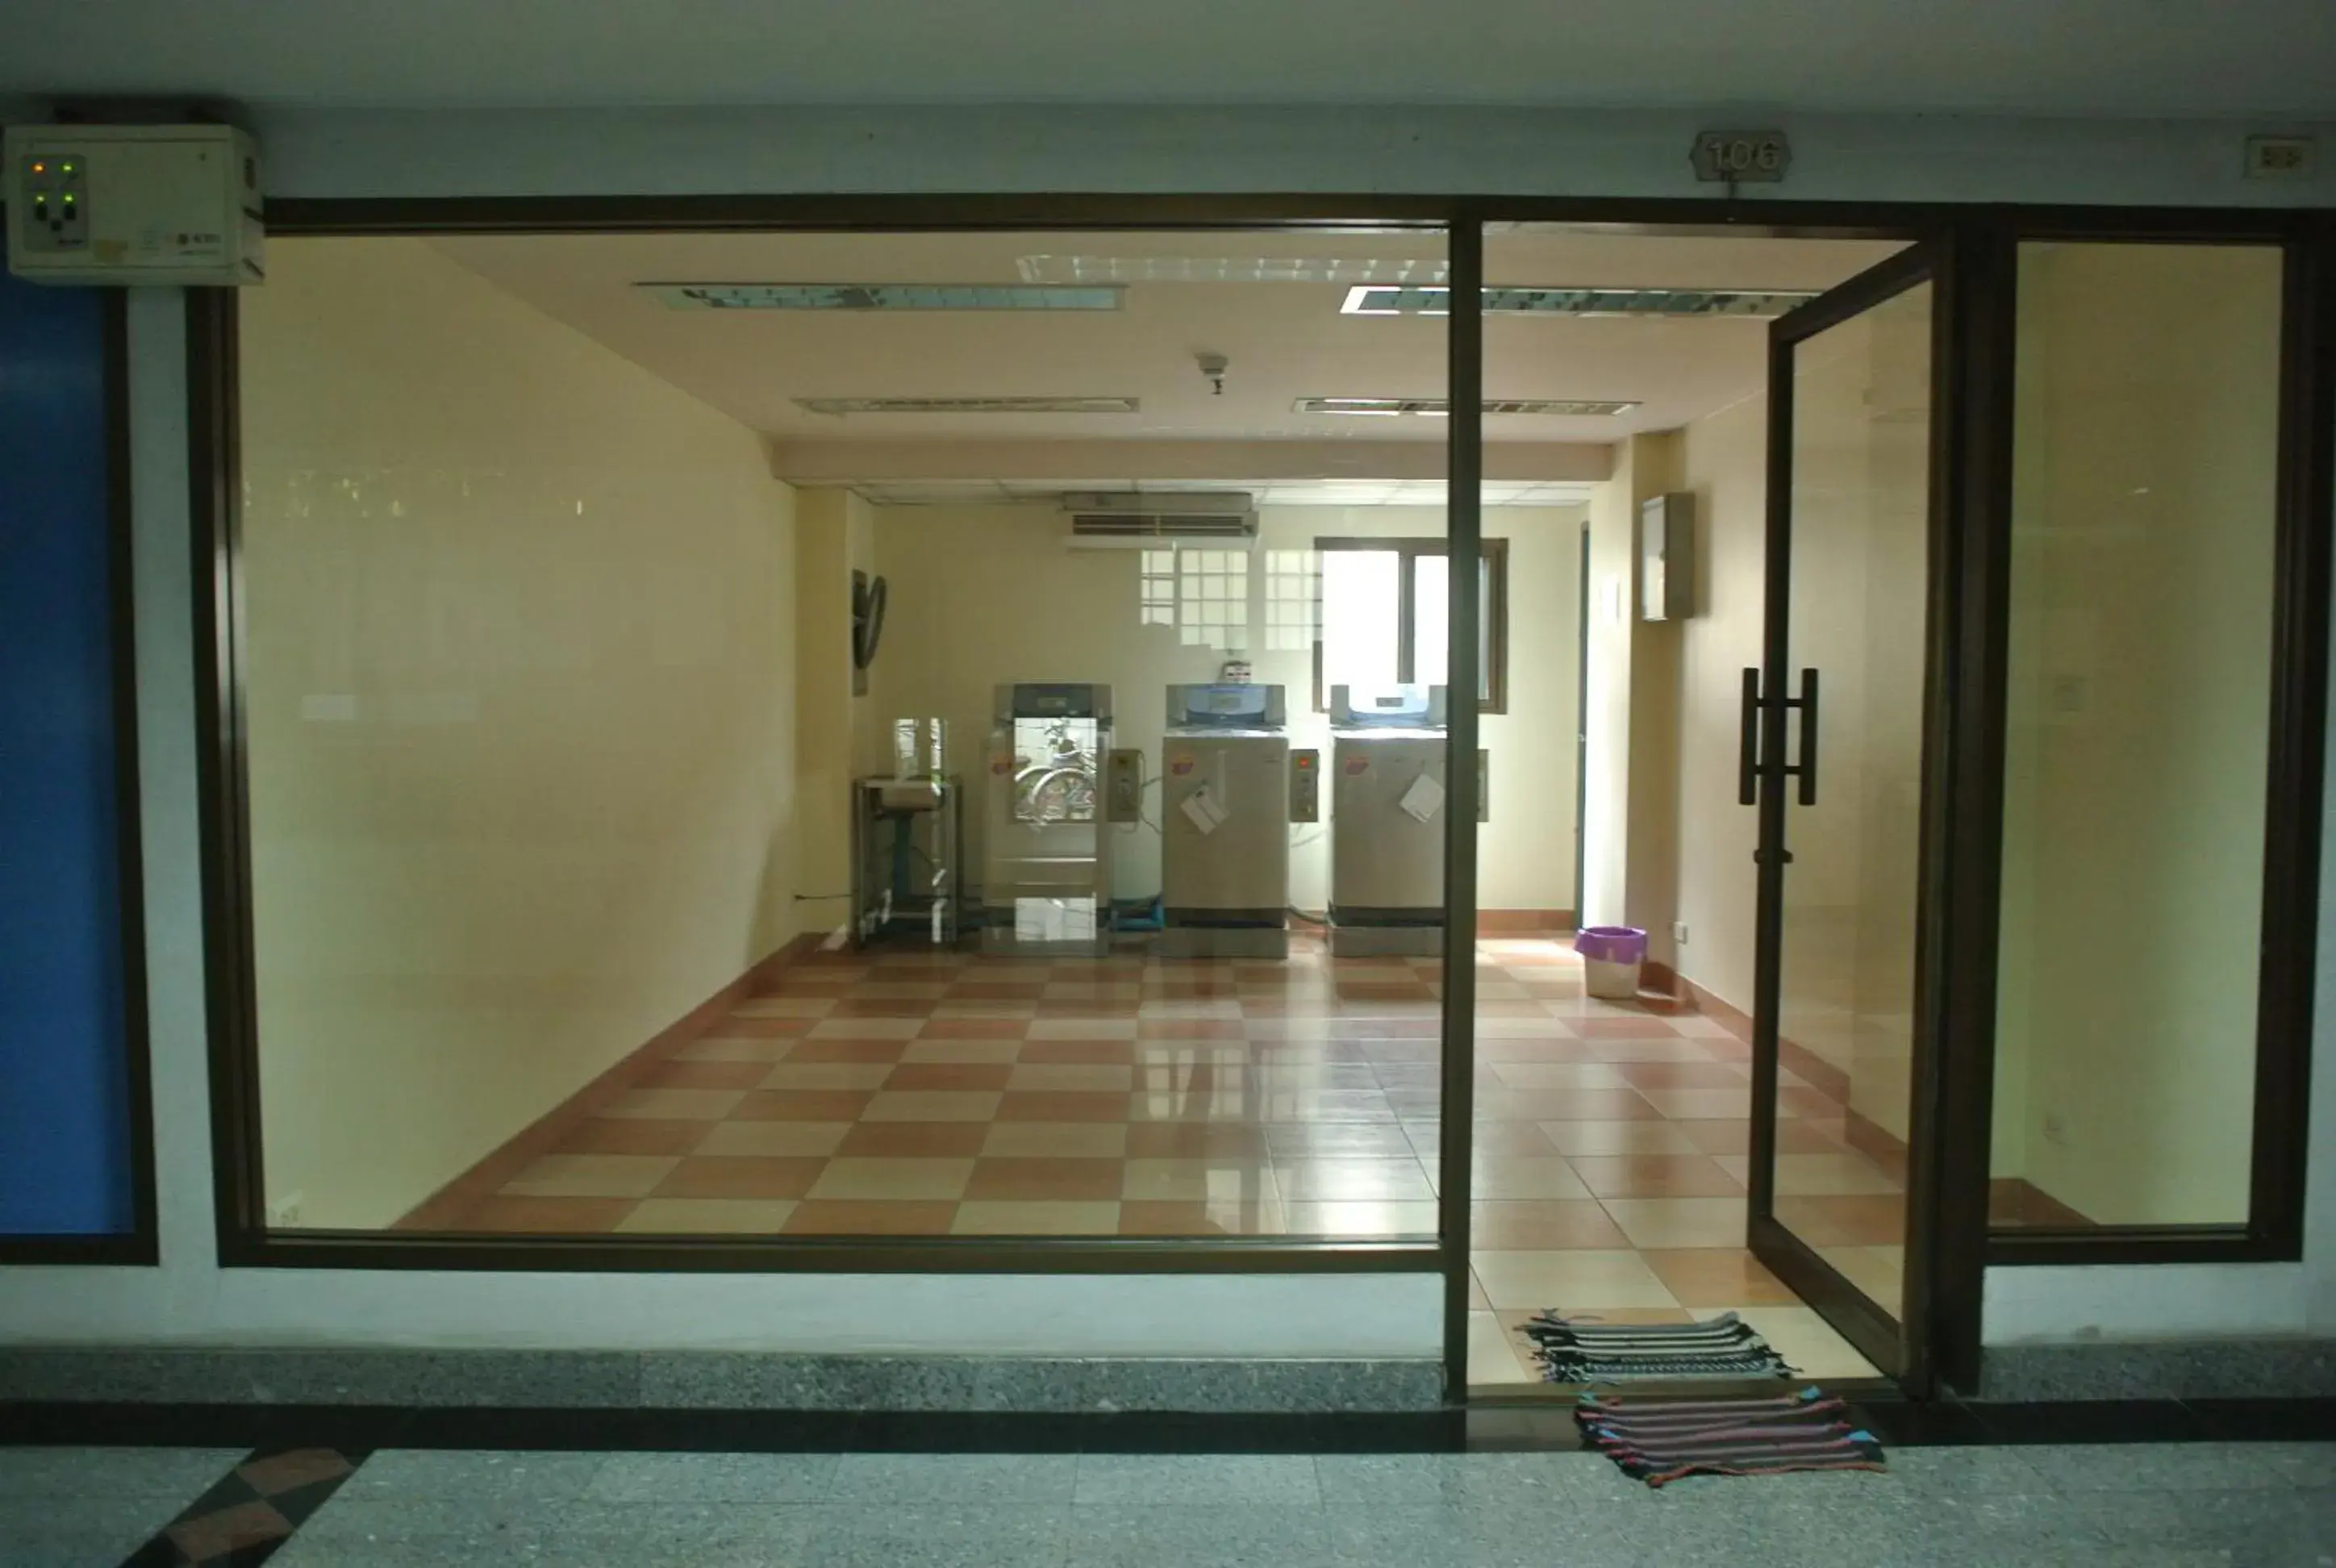 Area and facilities in S.K. Residence